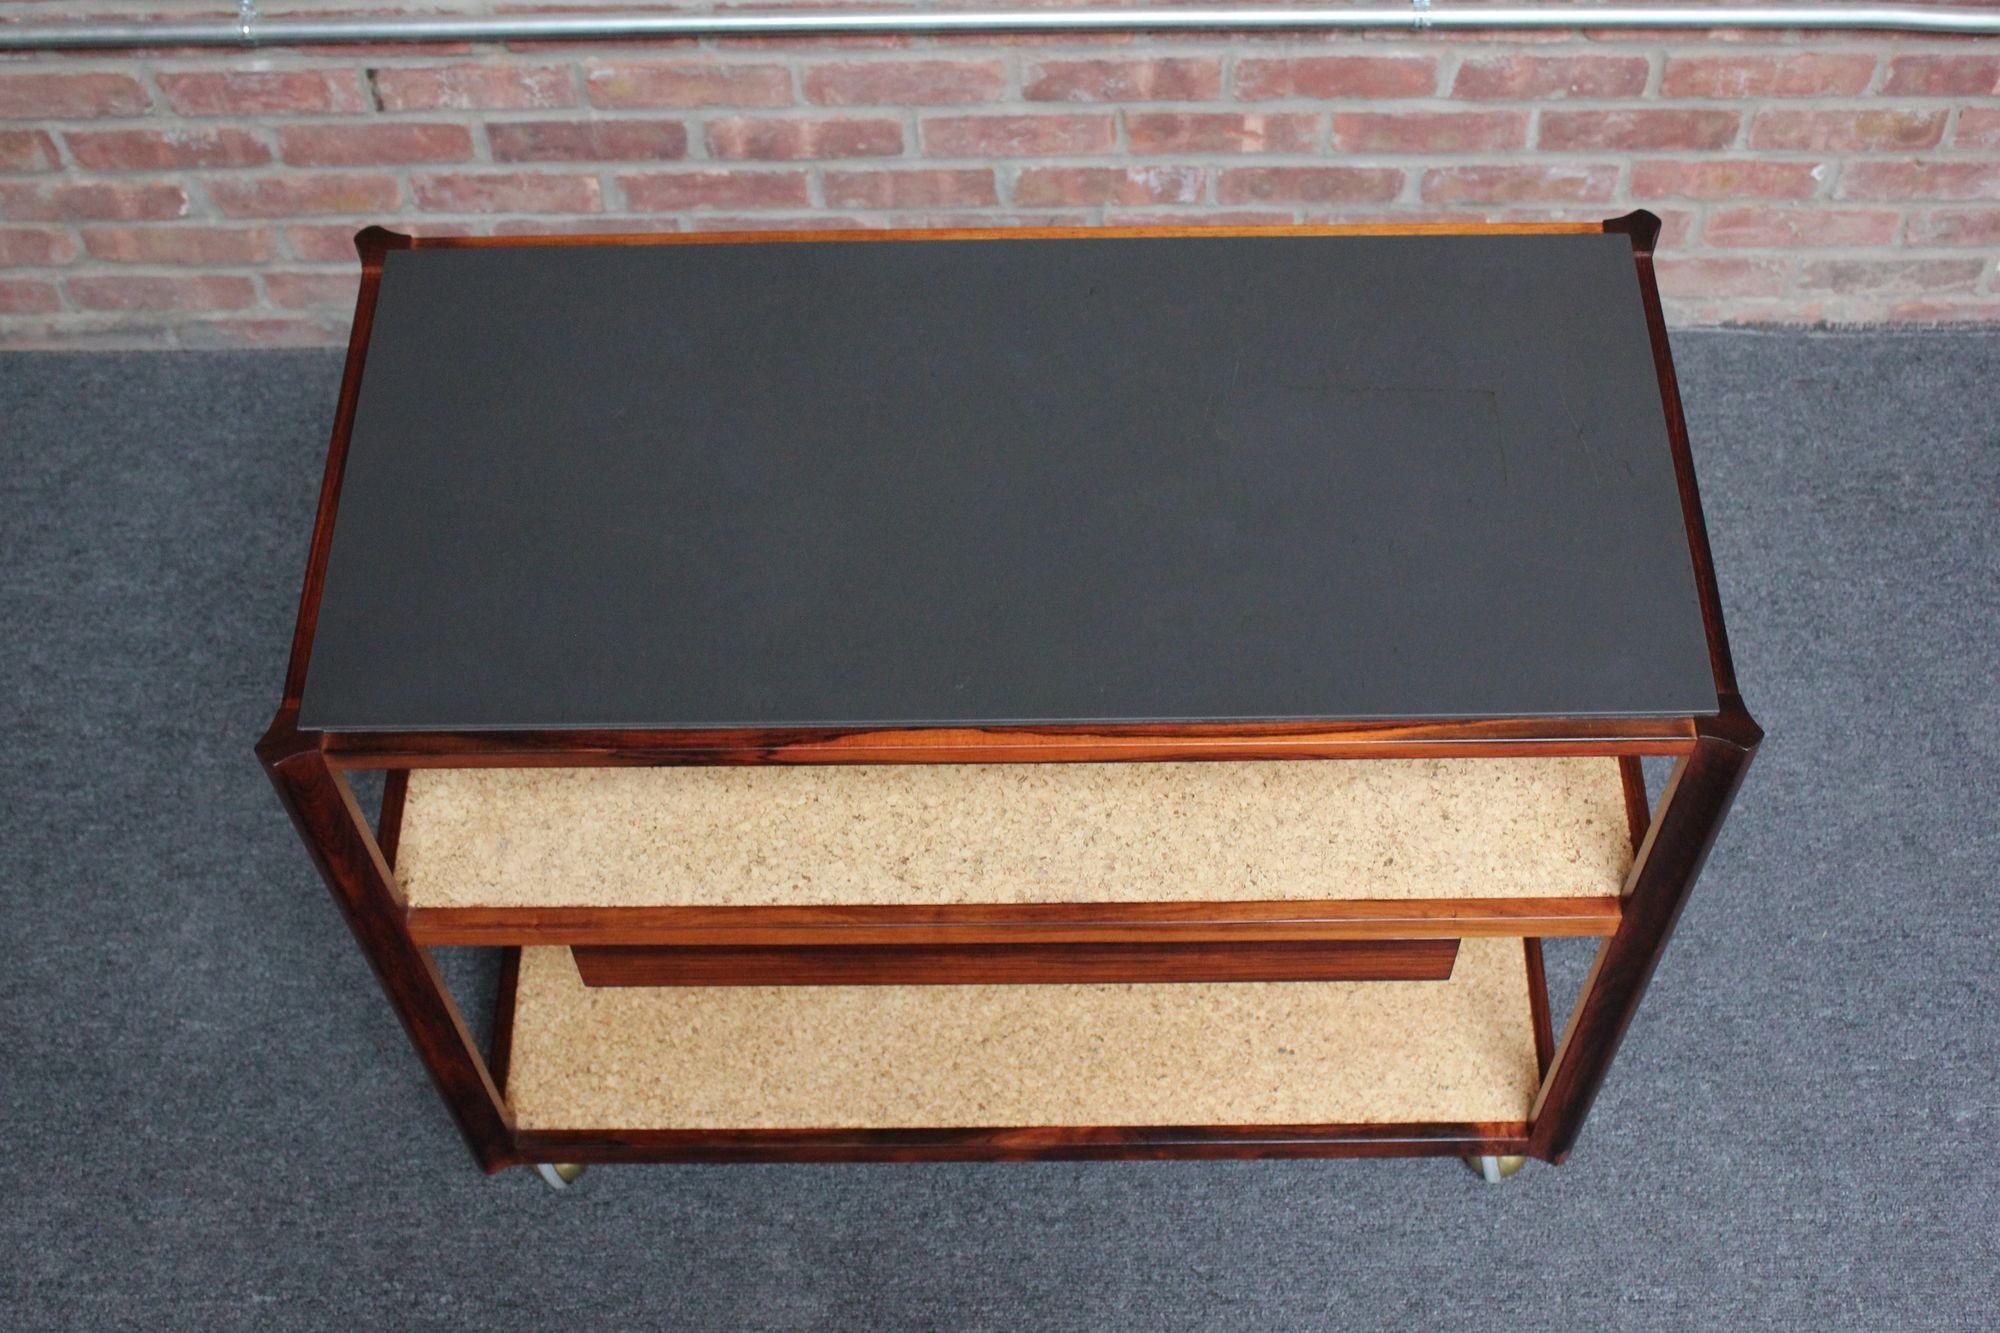 Mid-20th Century Mid-Century Modern Rosewood and Cork Bar Cart by Roger Sprunger for Dunbar For Sale